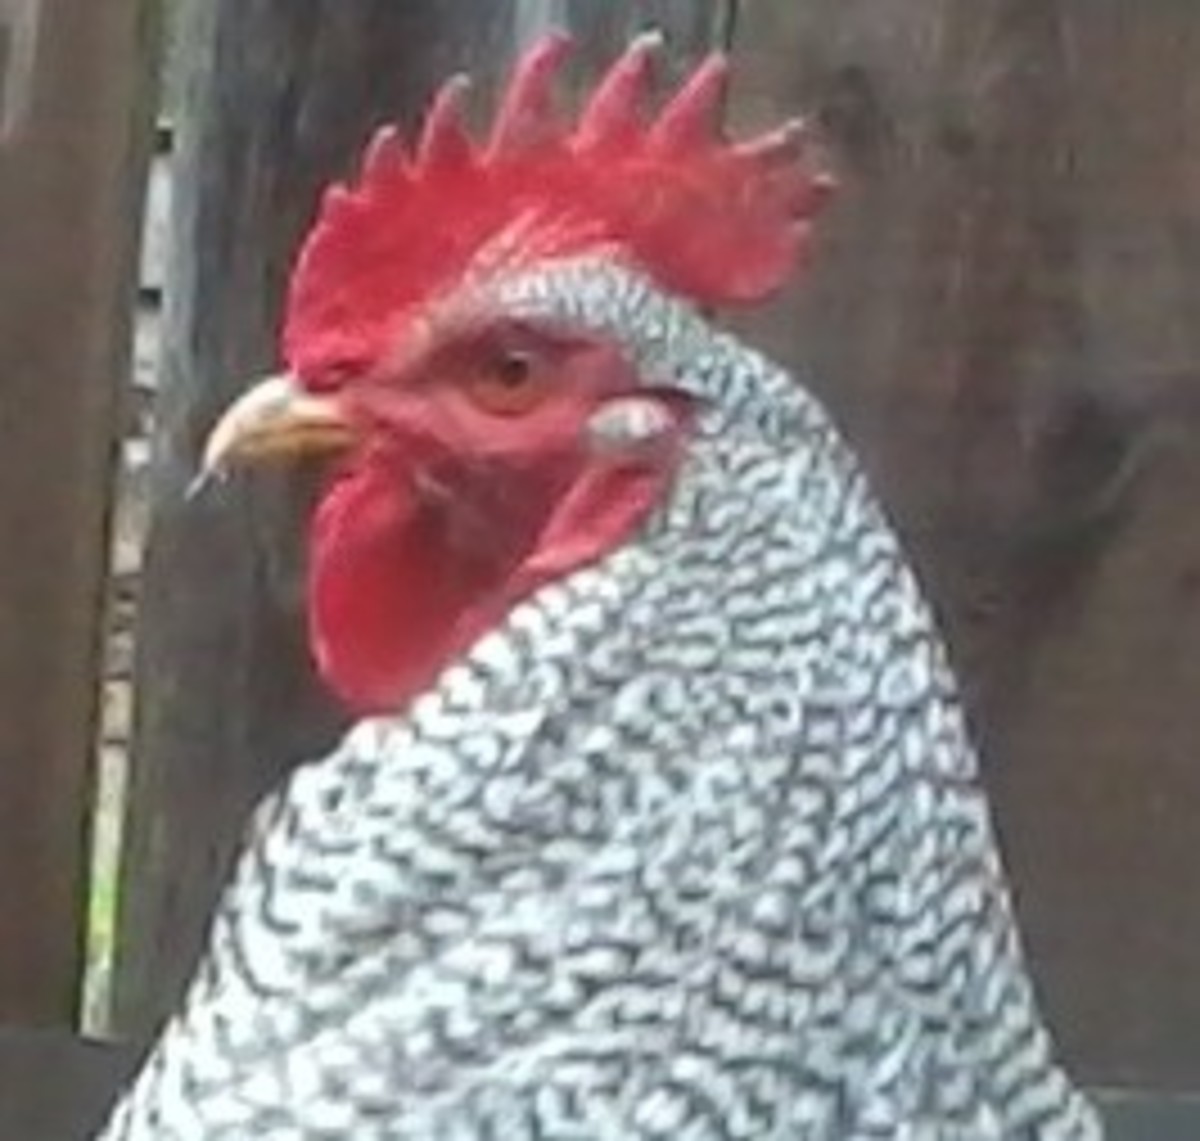 The healthy bright-red comb of a chicken.